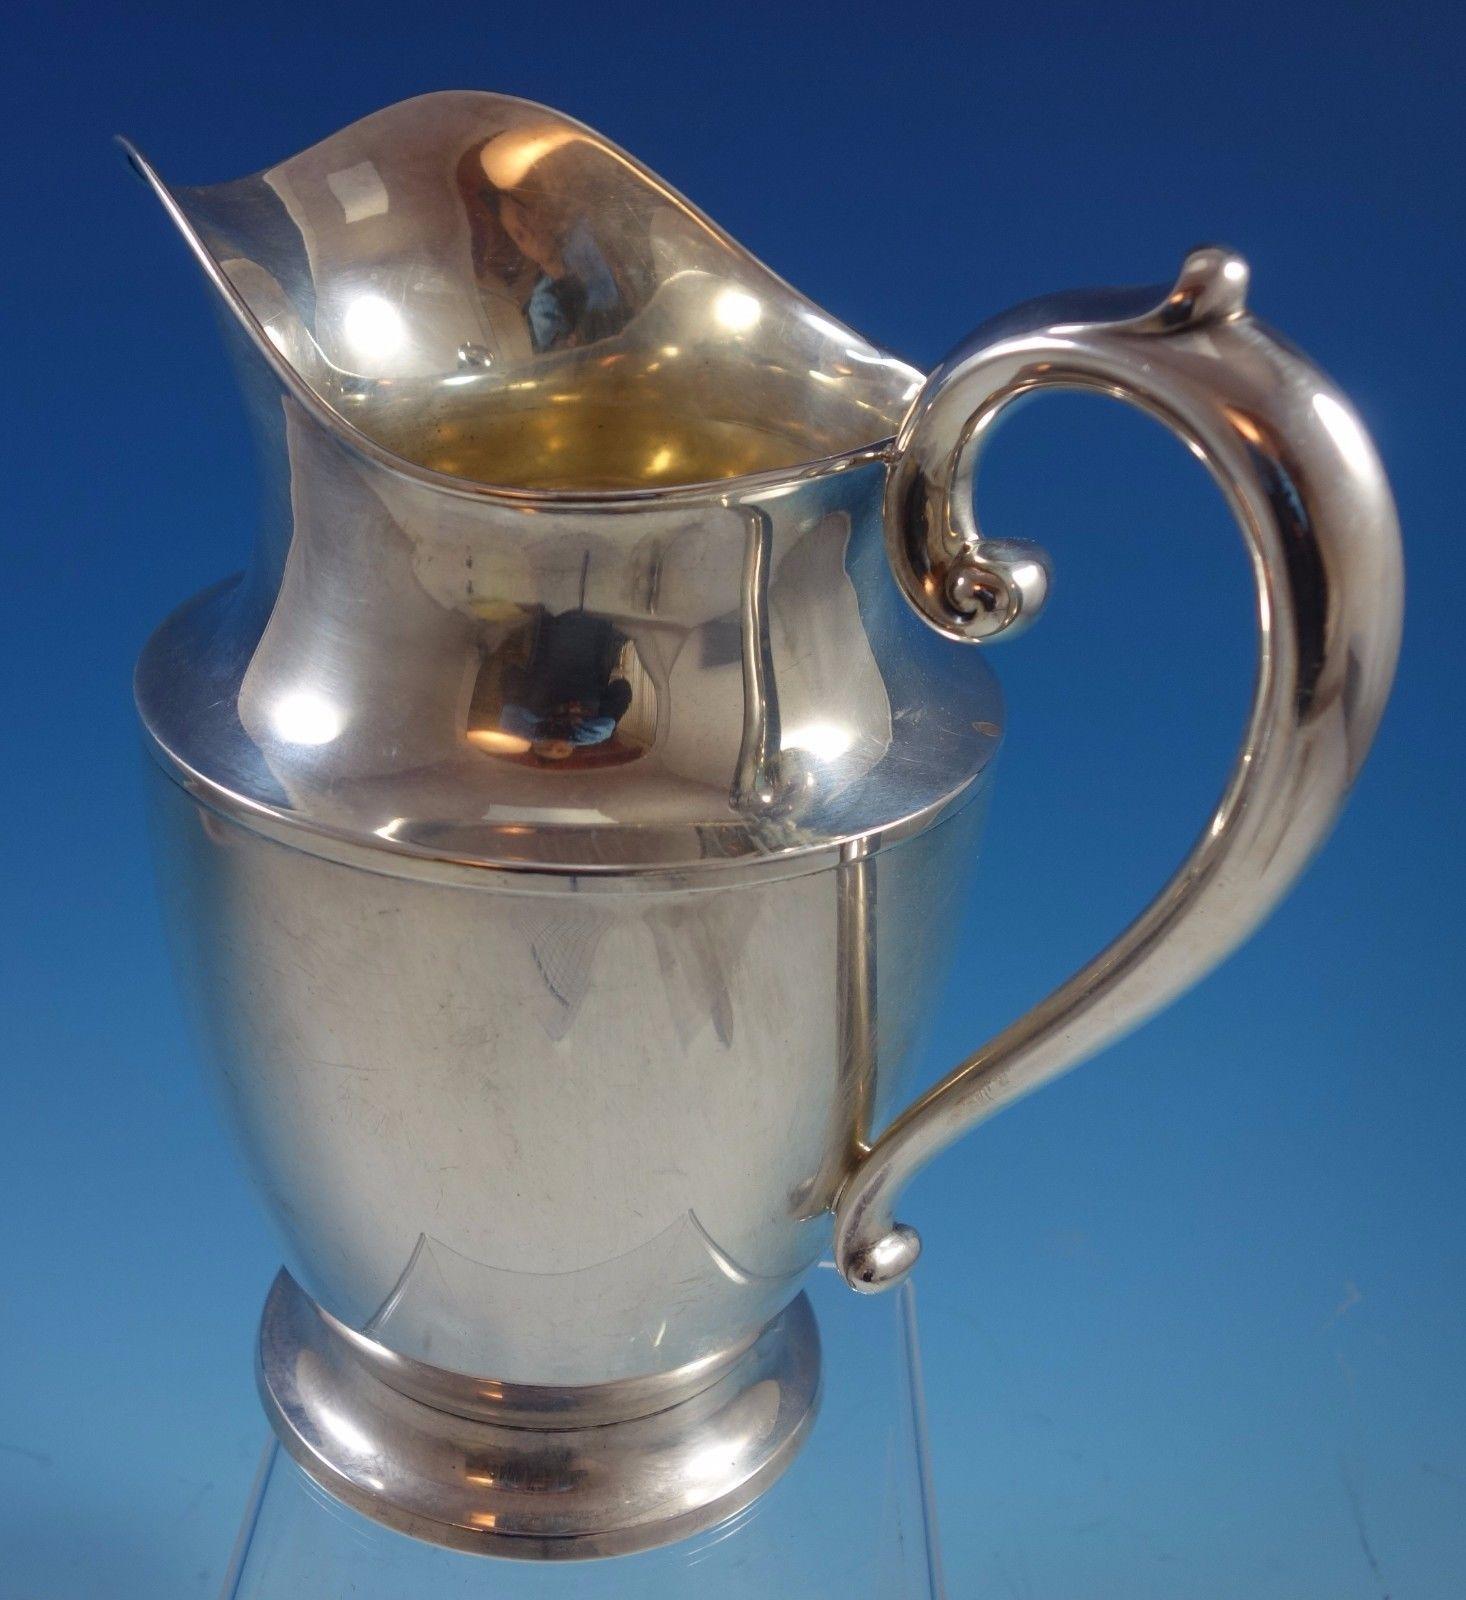 Puritan by Wallace sterling silver water pitcher. The piece is marked with #20, and it has a vintage scrolly monogram (see photos). The pitcher measures 9 1/2